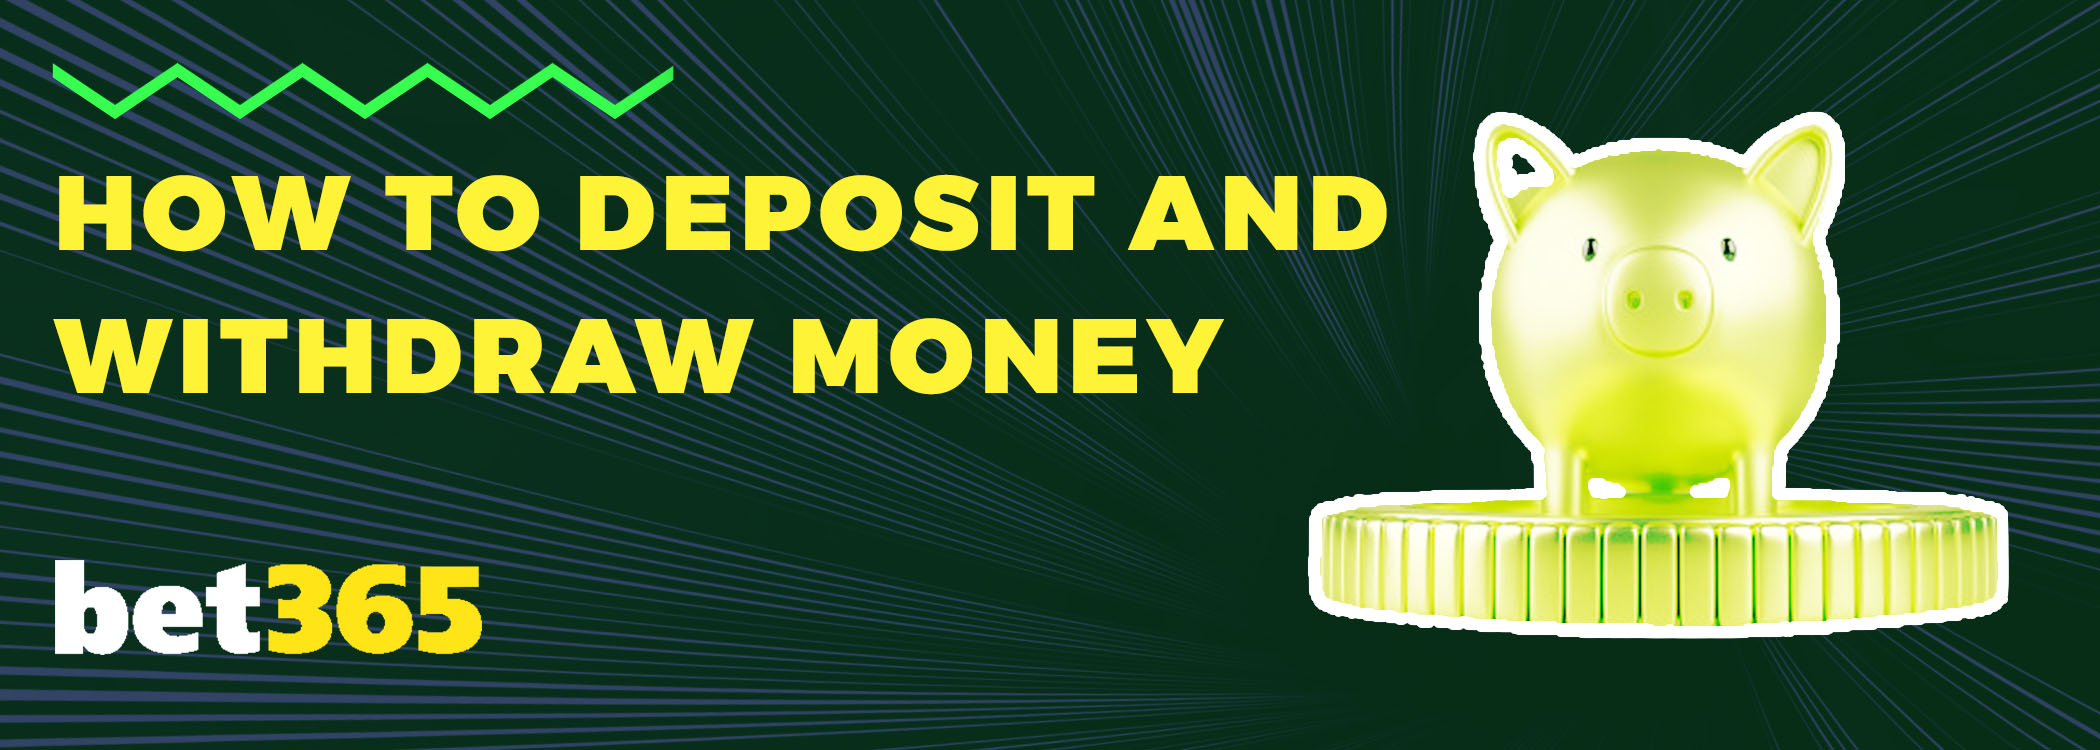 How to deposit and withdraw money at Bet365